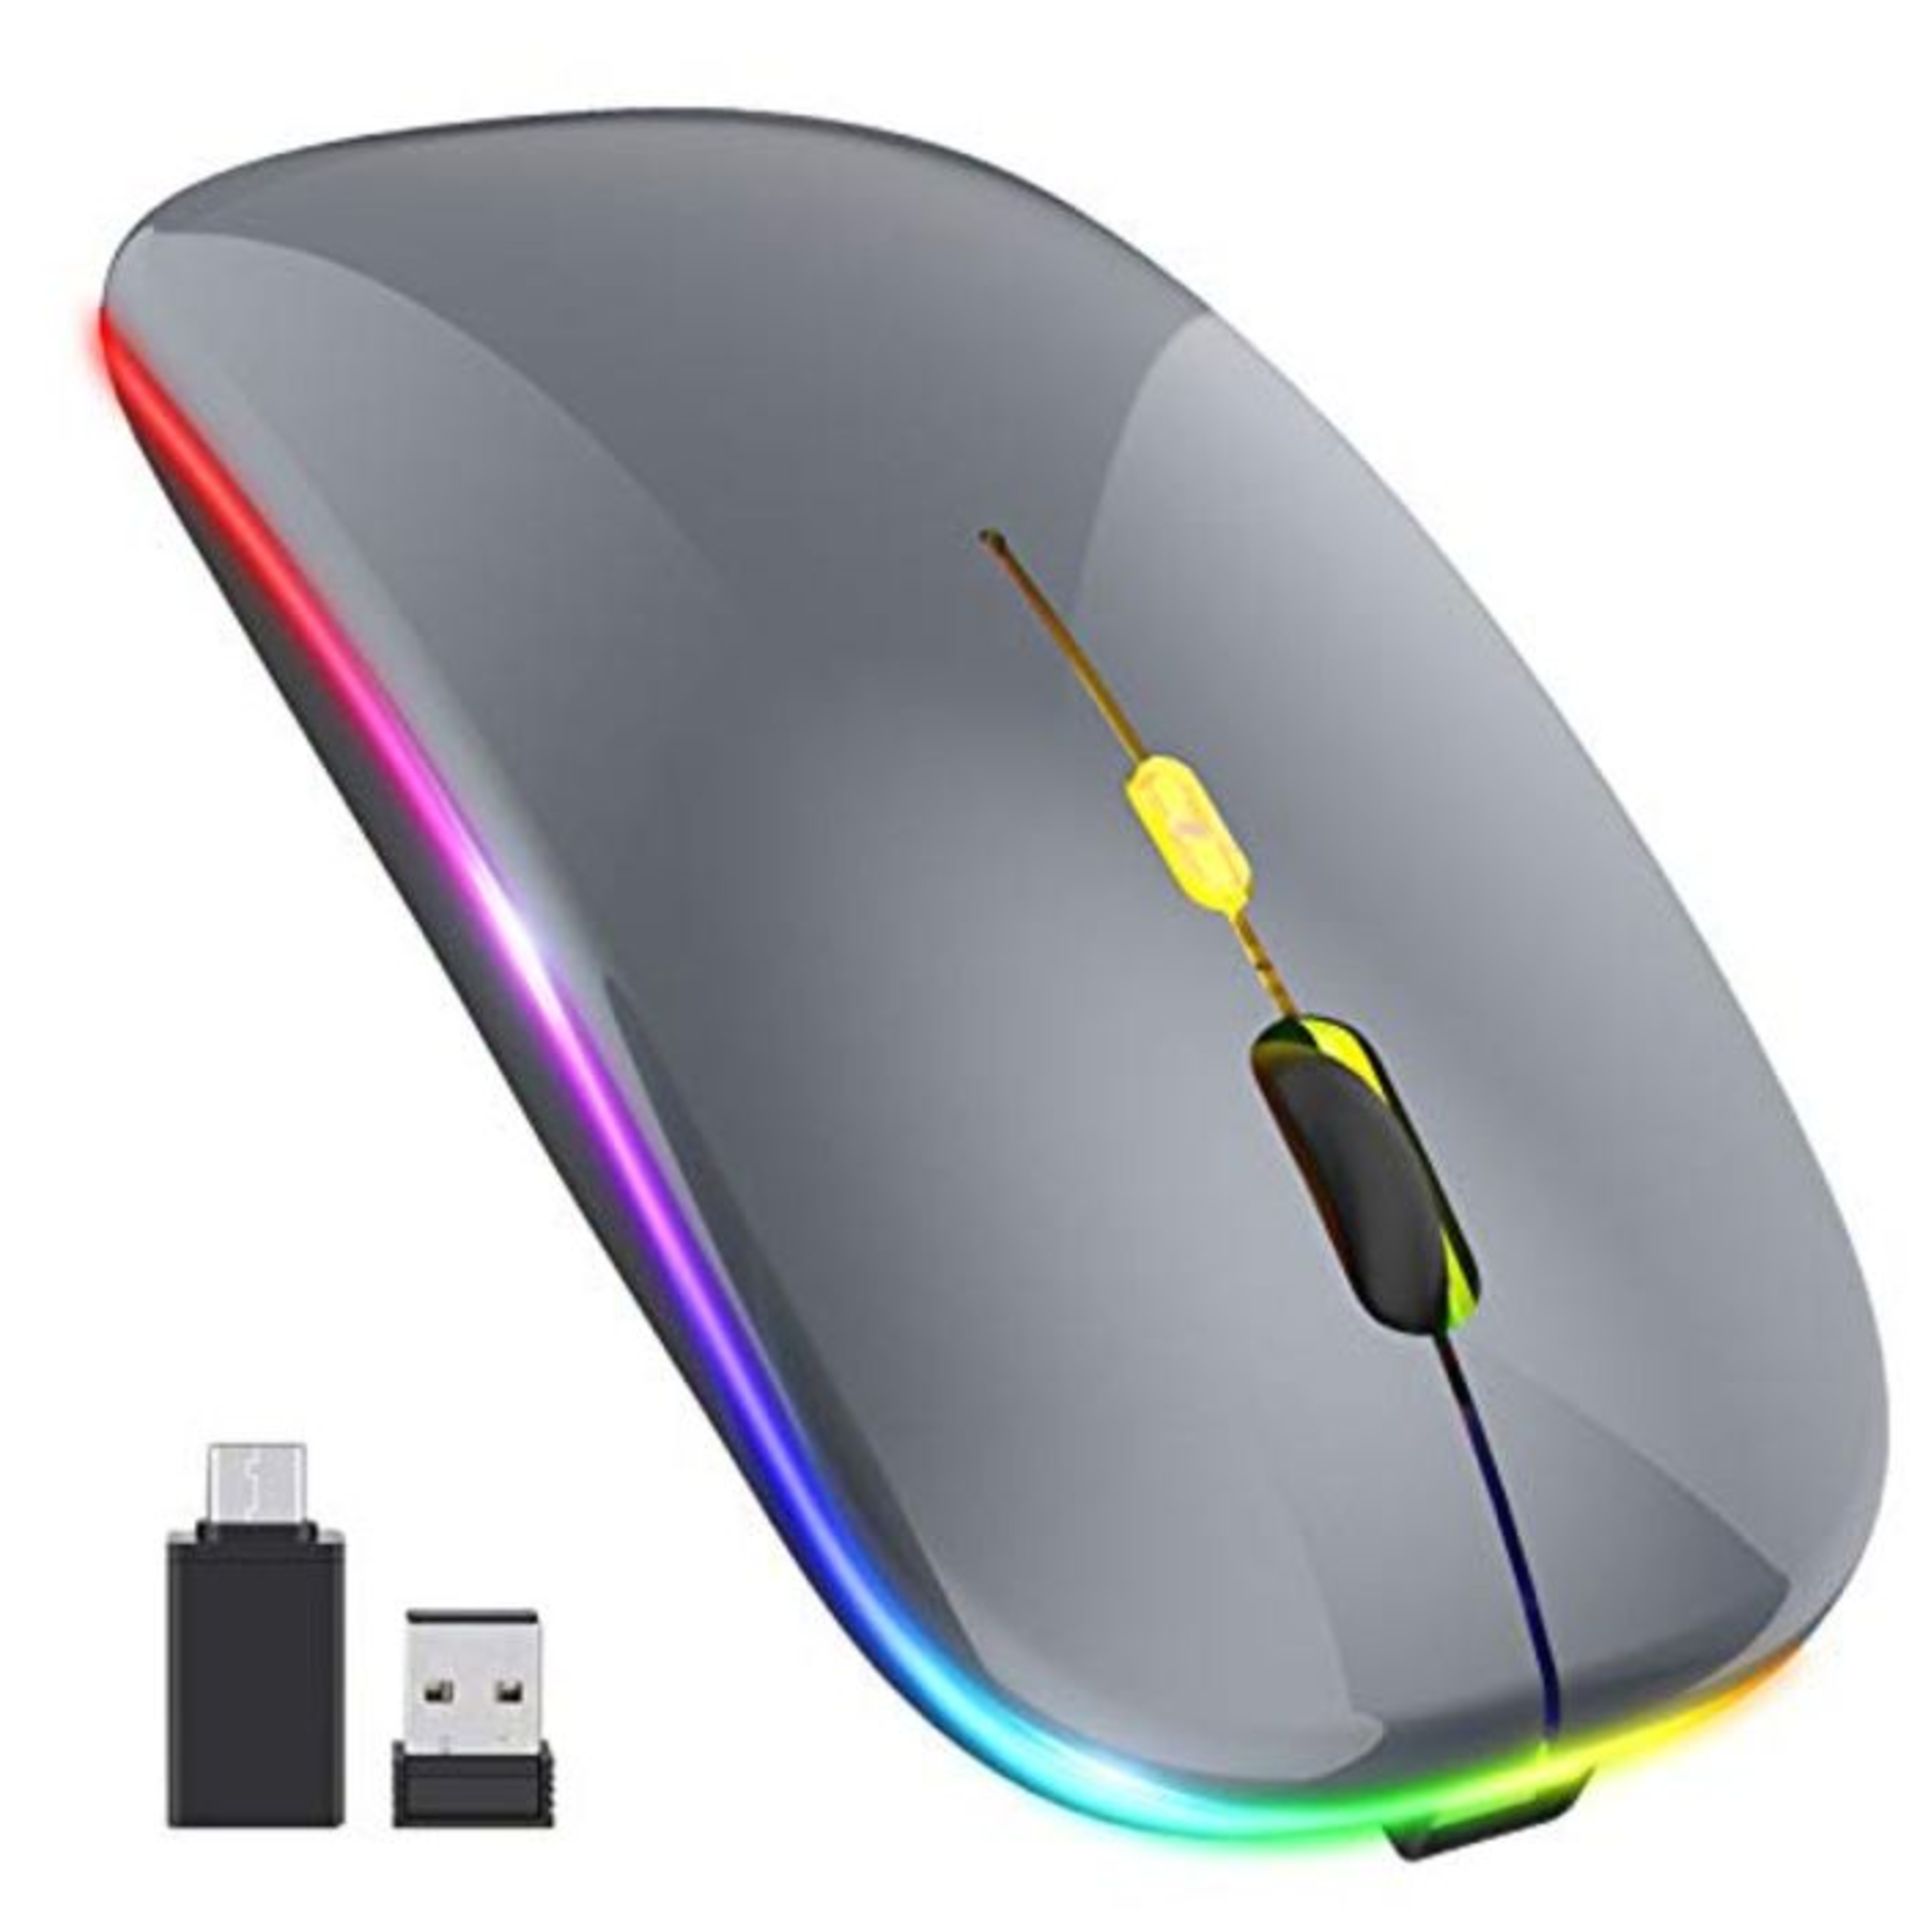 [CRACKED] Pasonomi Wireless Rechargeable LED PC Mouse, Quiet Wireless Mouse, Laptop Mo